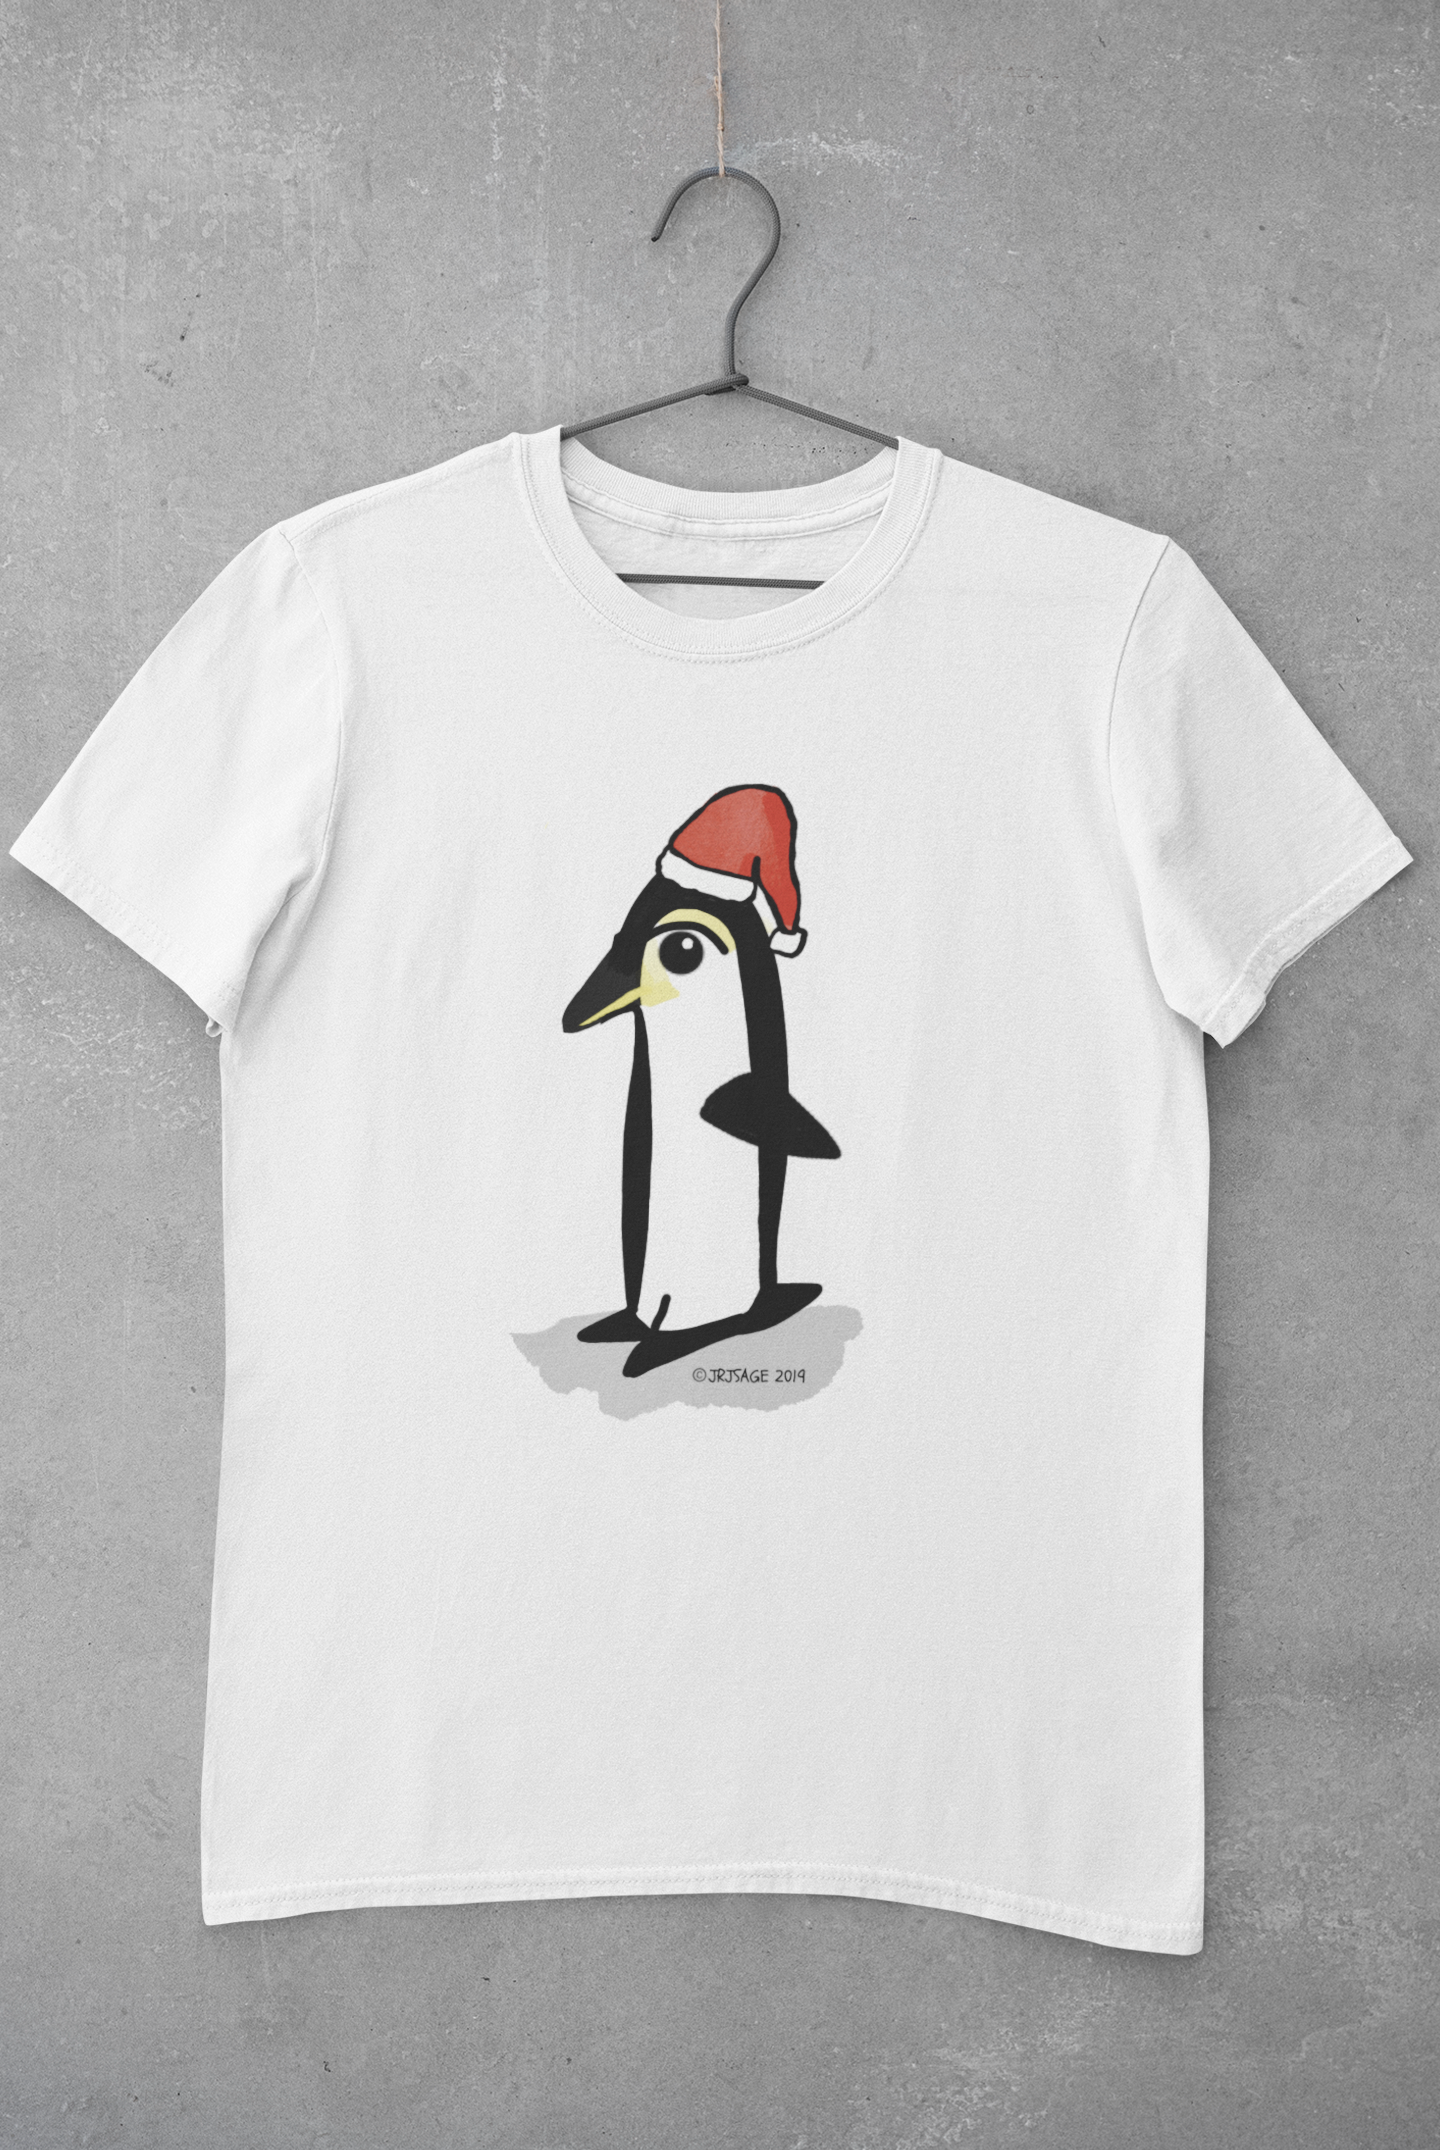 Santa Penguin Christmas T-shirt - Illustrated cute Xmas penguin t-shirt design by Hector and Bone on a white vegan cotton tee shirt